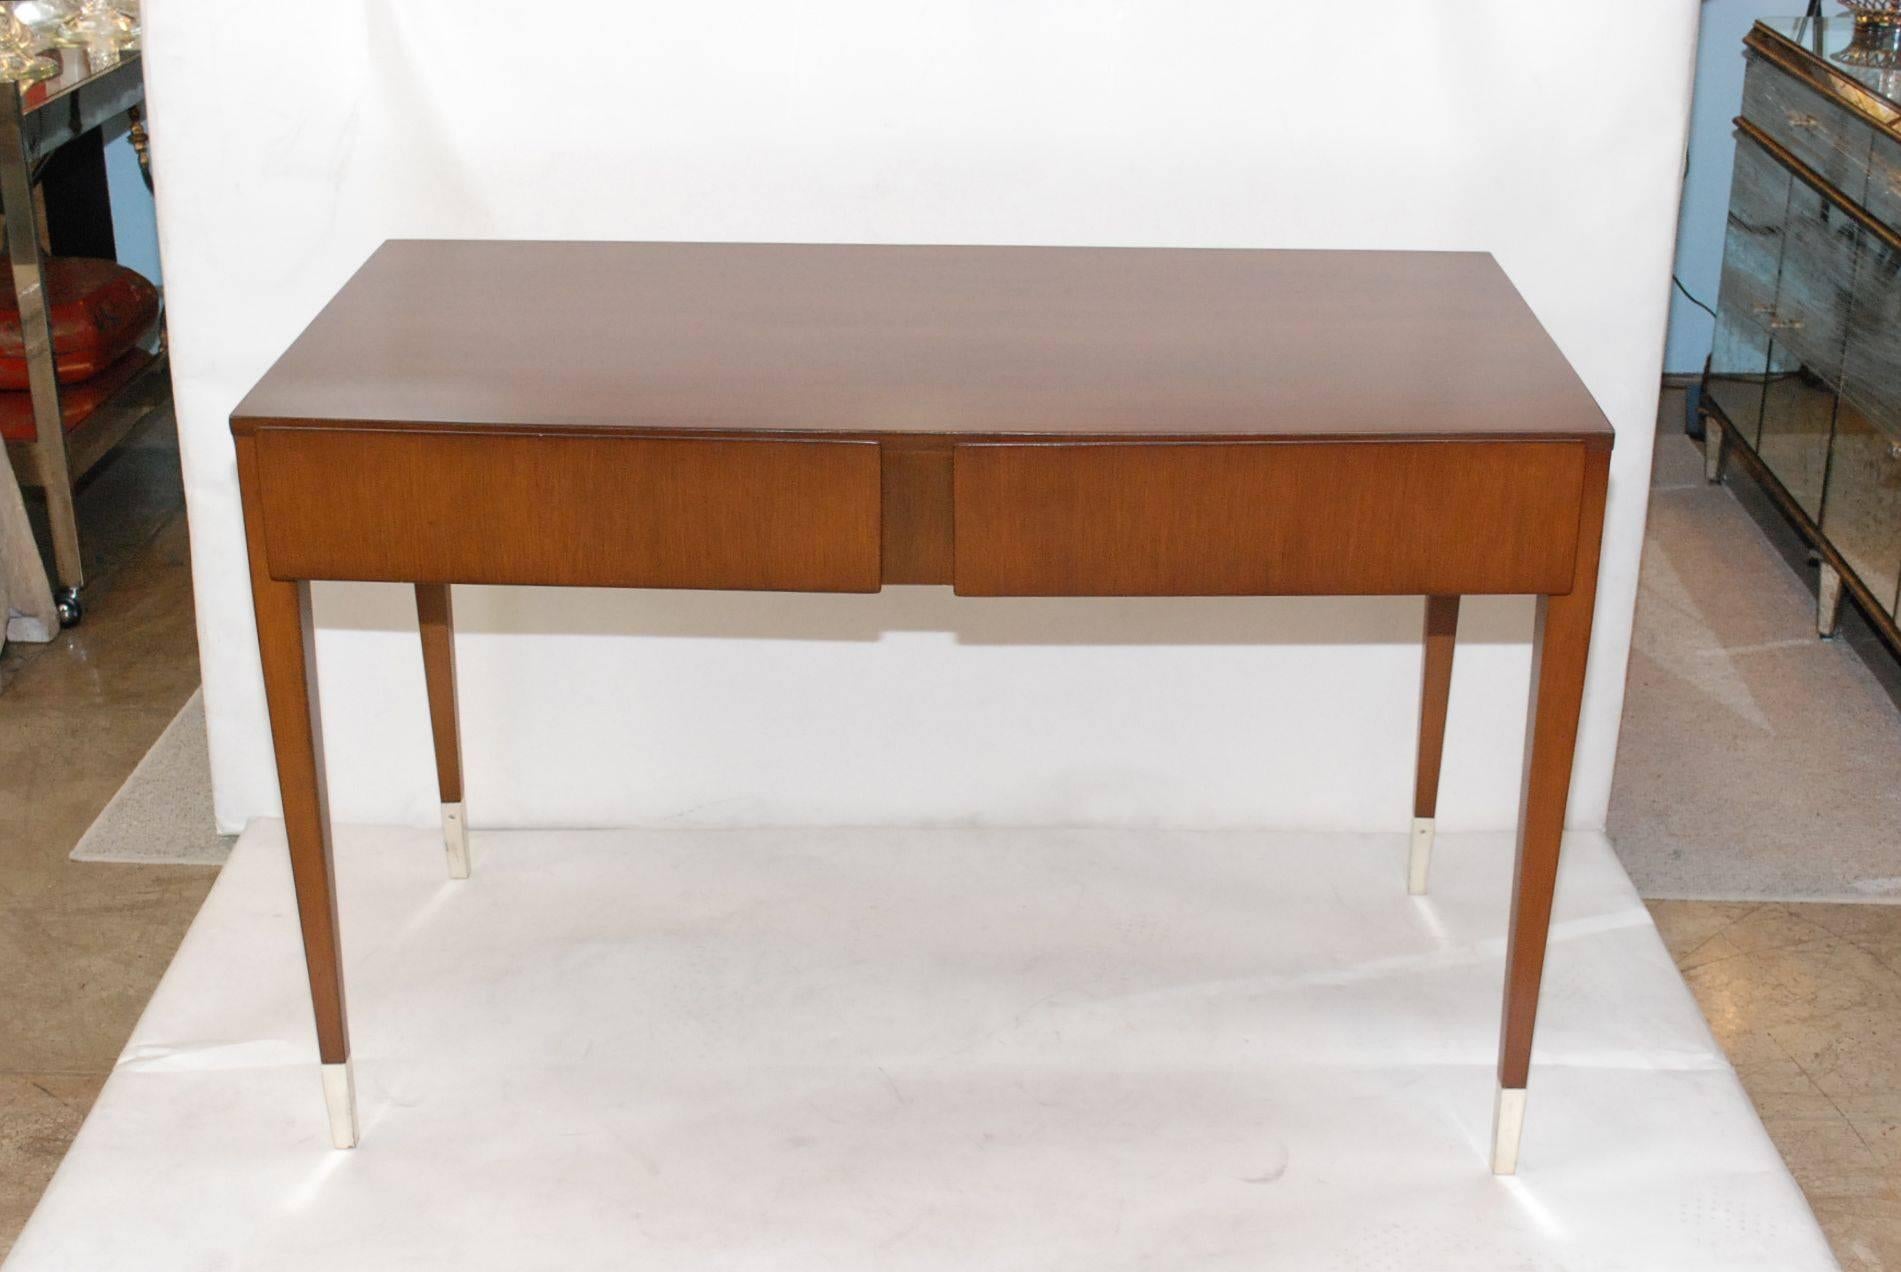 Rare 1940's walnut and oak two drawers and nickel-plated feet desk design by Gio Ponti, (1891-1979).

Gio Ponti, byname of Giovanni Ponti (born Nov. 18, 1891, Milan, Italy—died Sept. 15, 1979, Milan) Italian architect and designer associated with